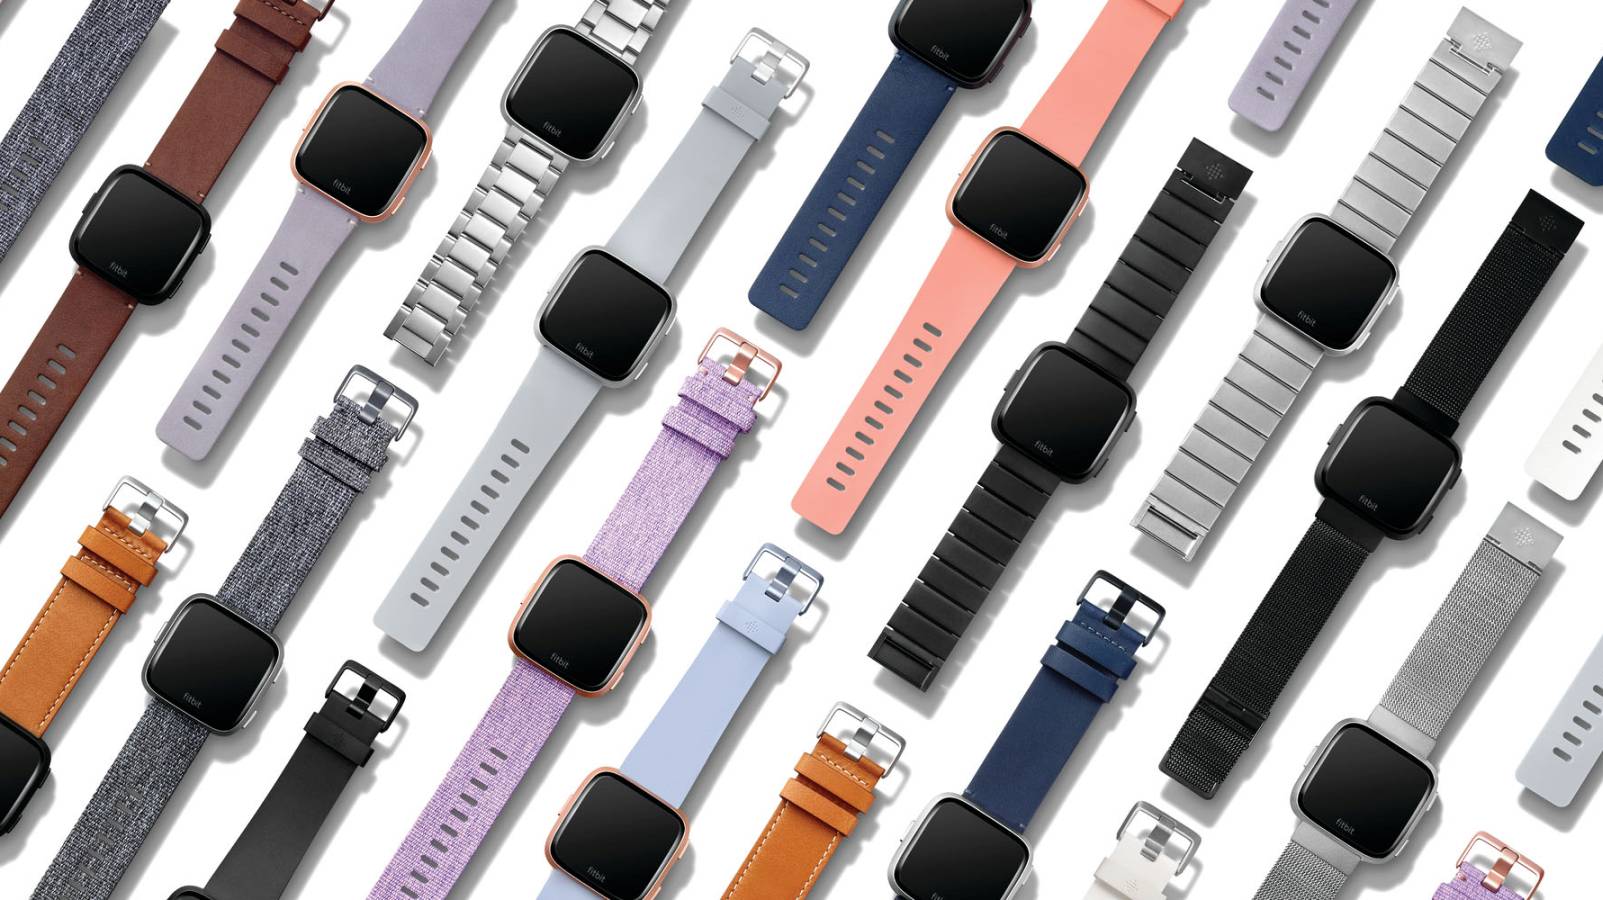 google buys fitbit